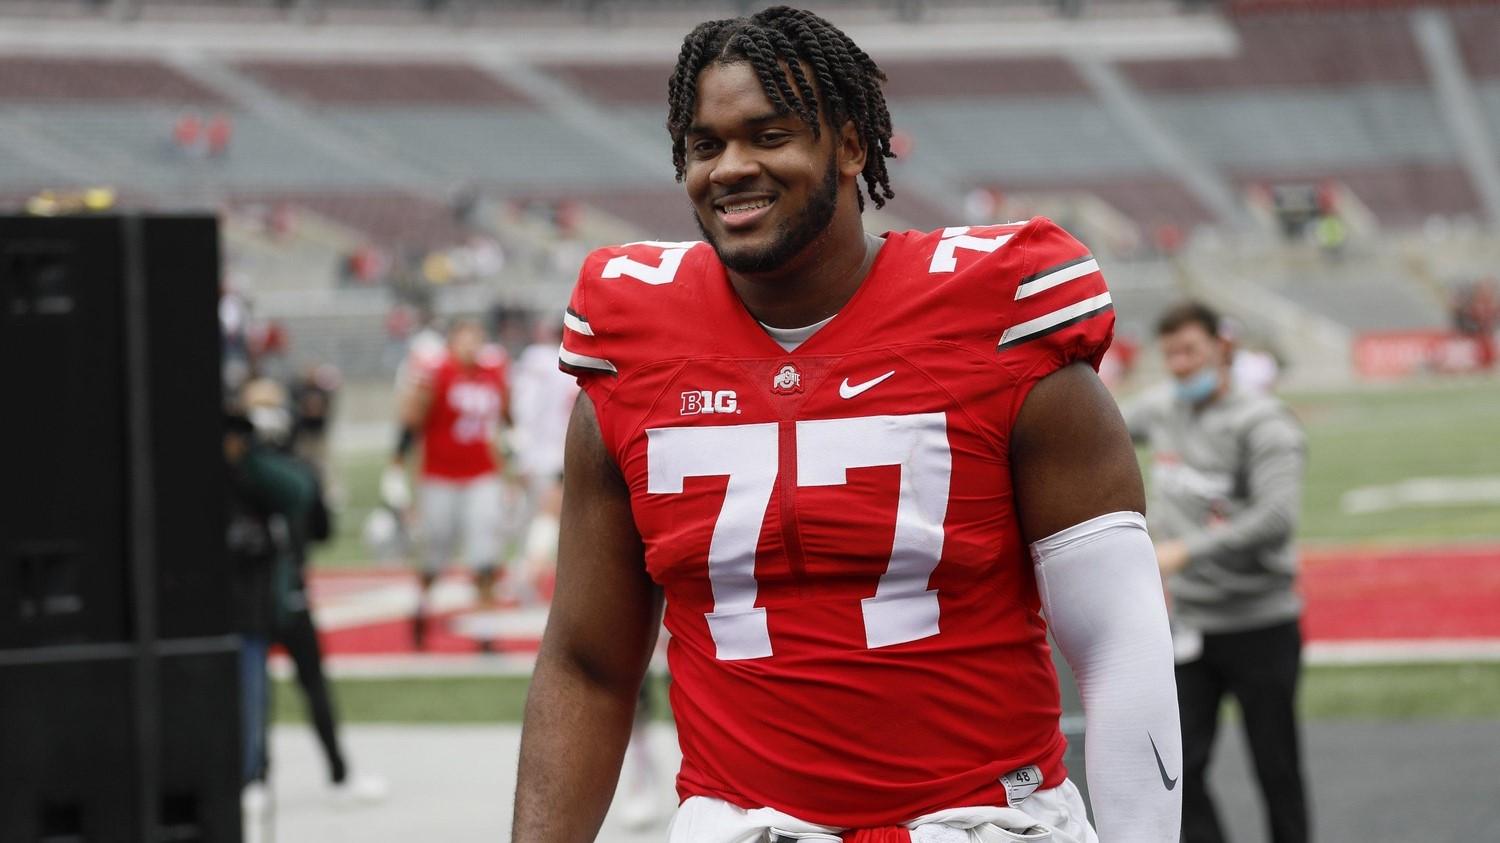 Team Buckeye offensive guard Paris Johnson Jr. (77) leaves the field following the Ohio State Buckeyes football spring game at Ohio Stadium in Columbus on Saturday, April 17, 2021. Ohio State Football Spring Game / Adam Cairns/Columbus Dispatch / USA TODAY NETWORK